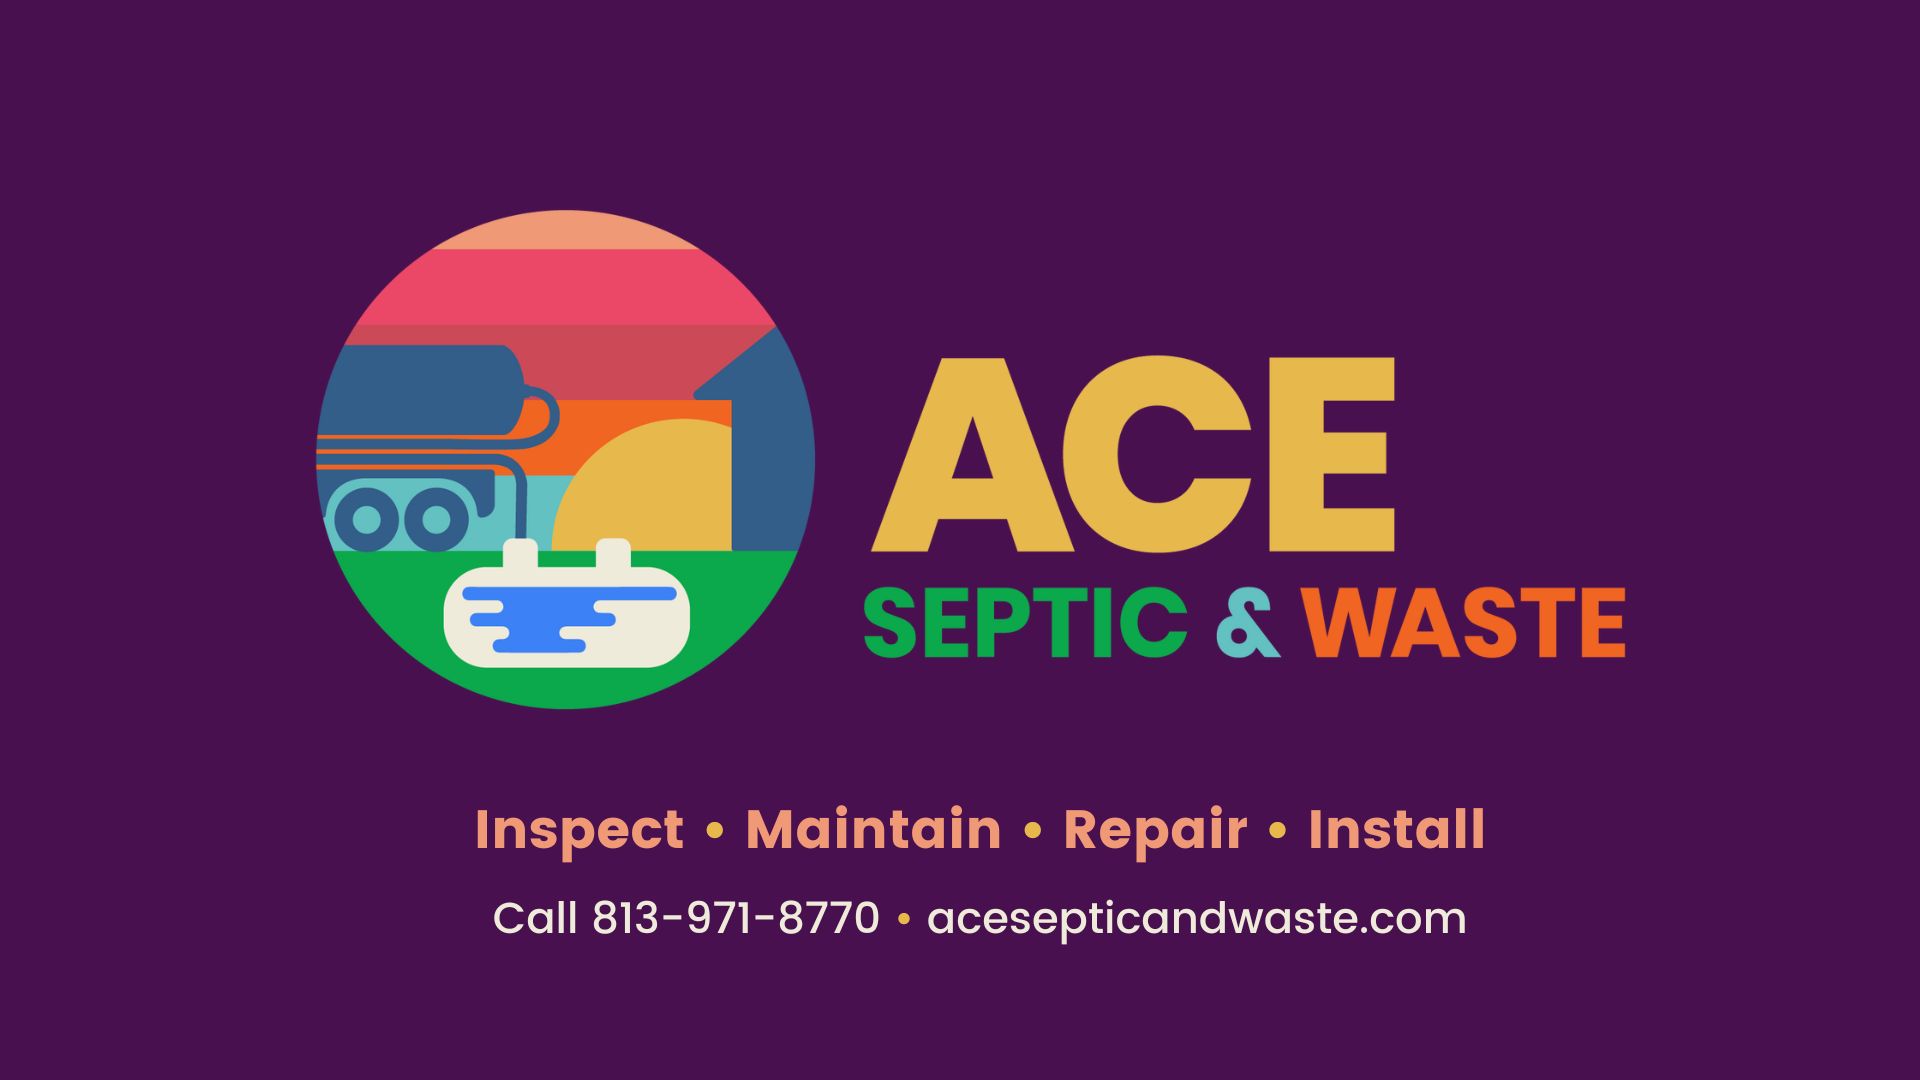 Graphic with purple background, and ACE Septic & Waste text next to a flat retro illustration of a septic truck filling a septic tank in front of a sunset and house silhouette. The text "inspect, maintain, repair, install" and "Call 813-971-8770" underneath.